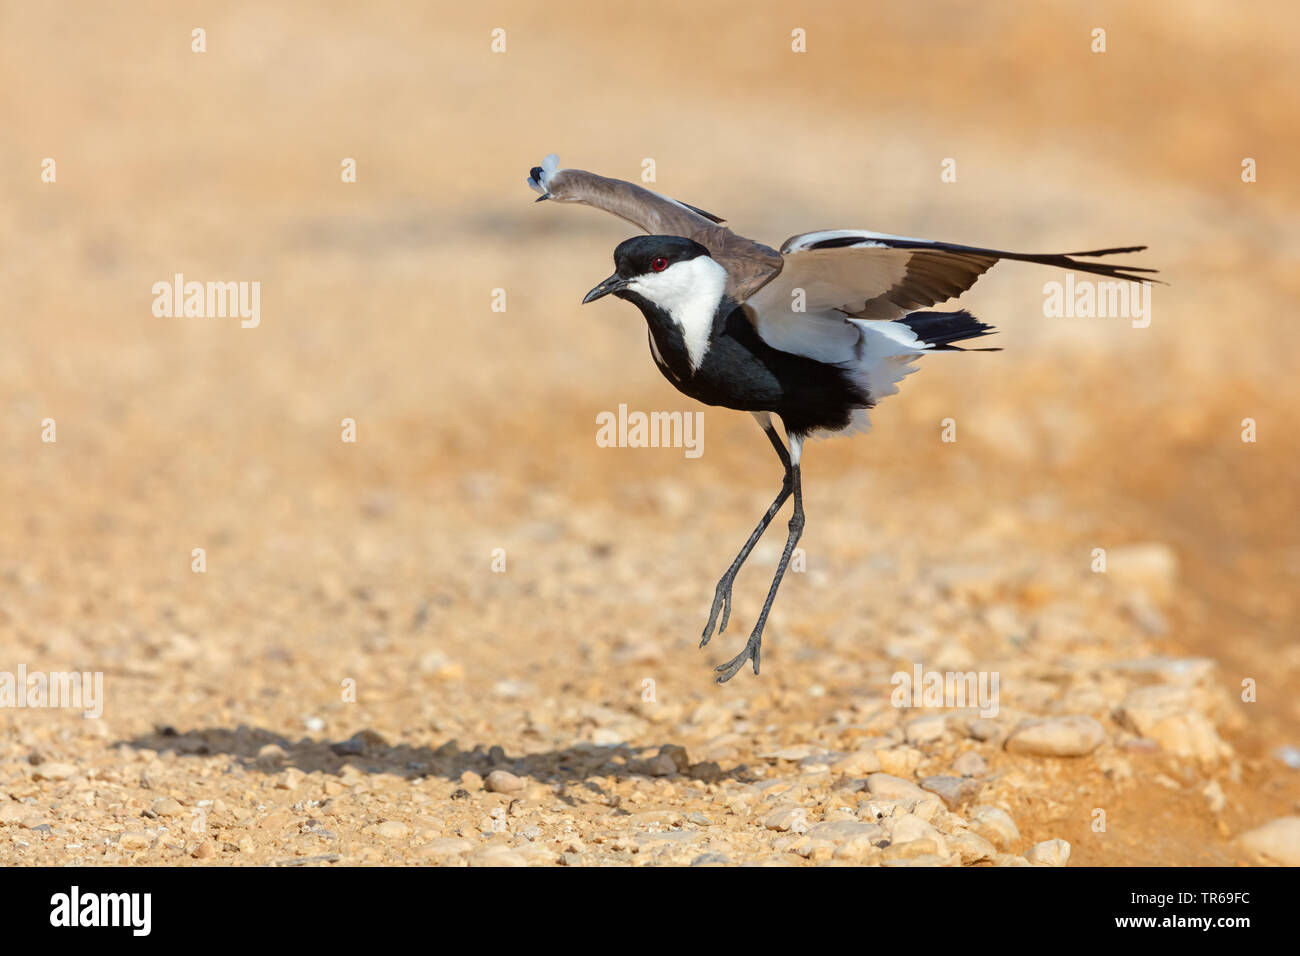 spur-winged plover (Vanellus spinosus, Hoplopterus spinosus), hopping, Israel Stock Photo